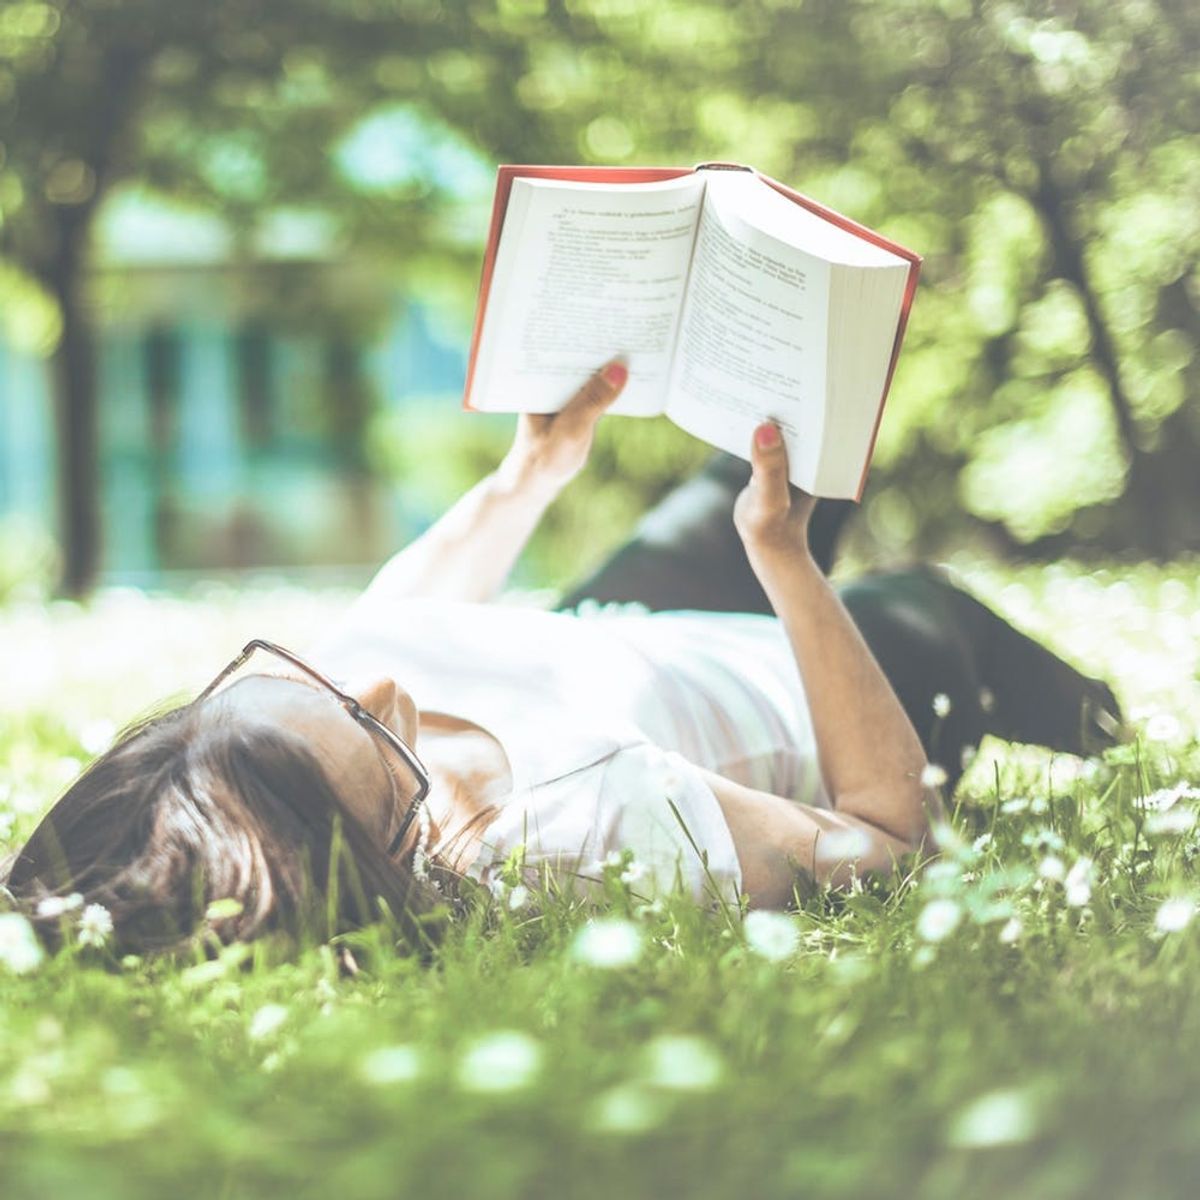 5 Refreshing Books for a Spring Escape